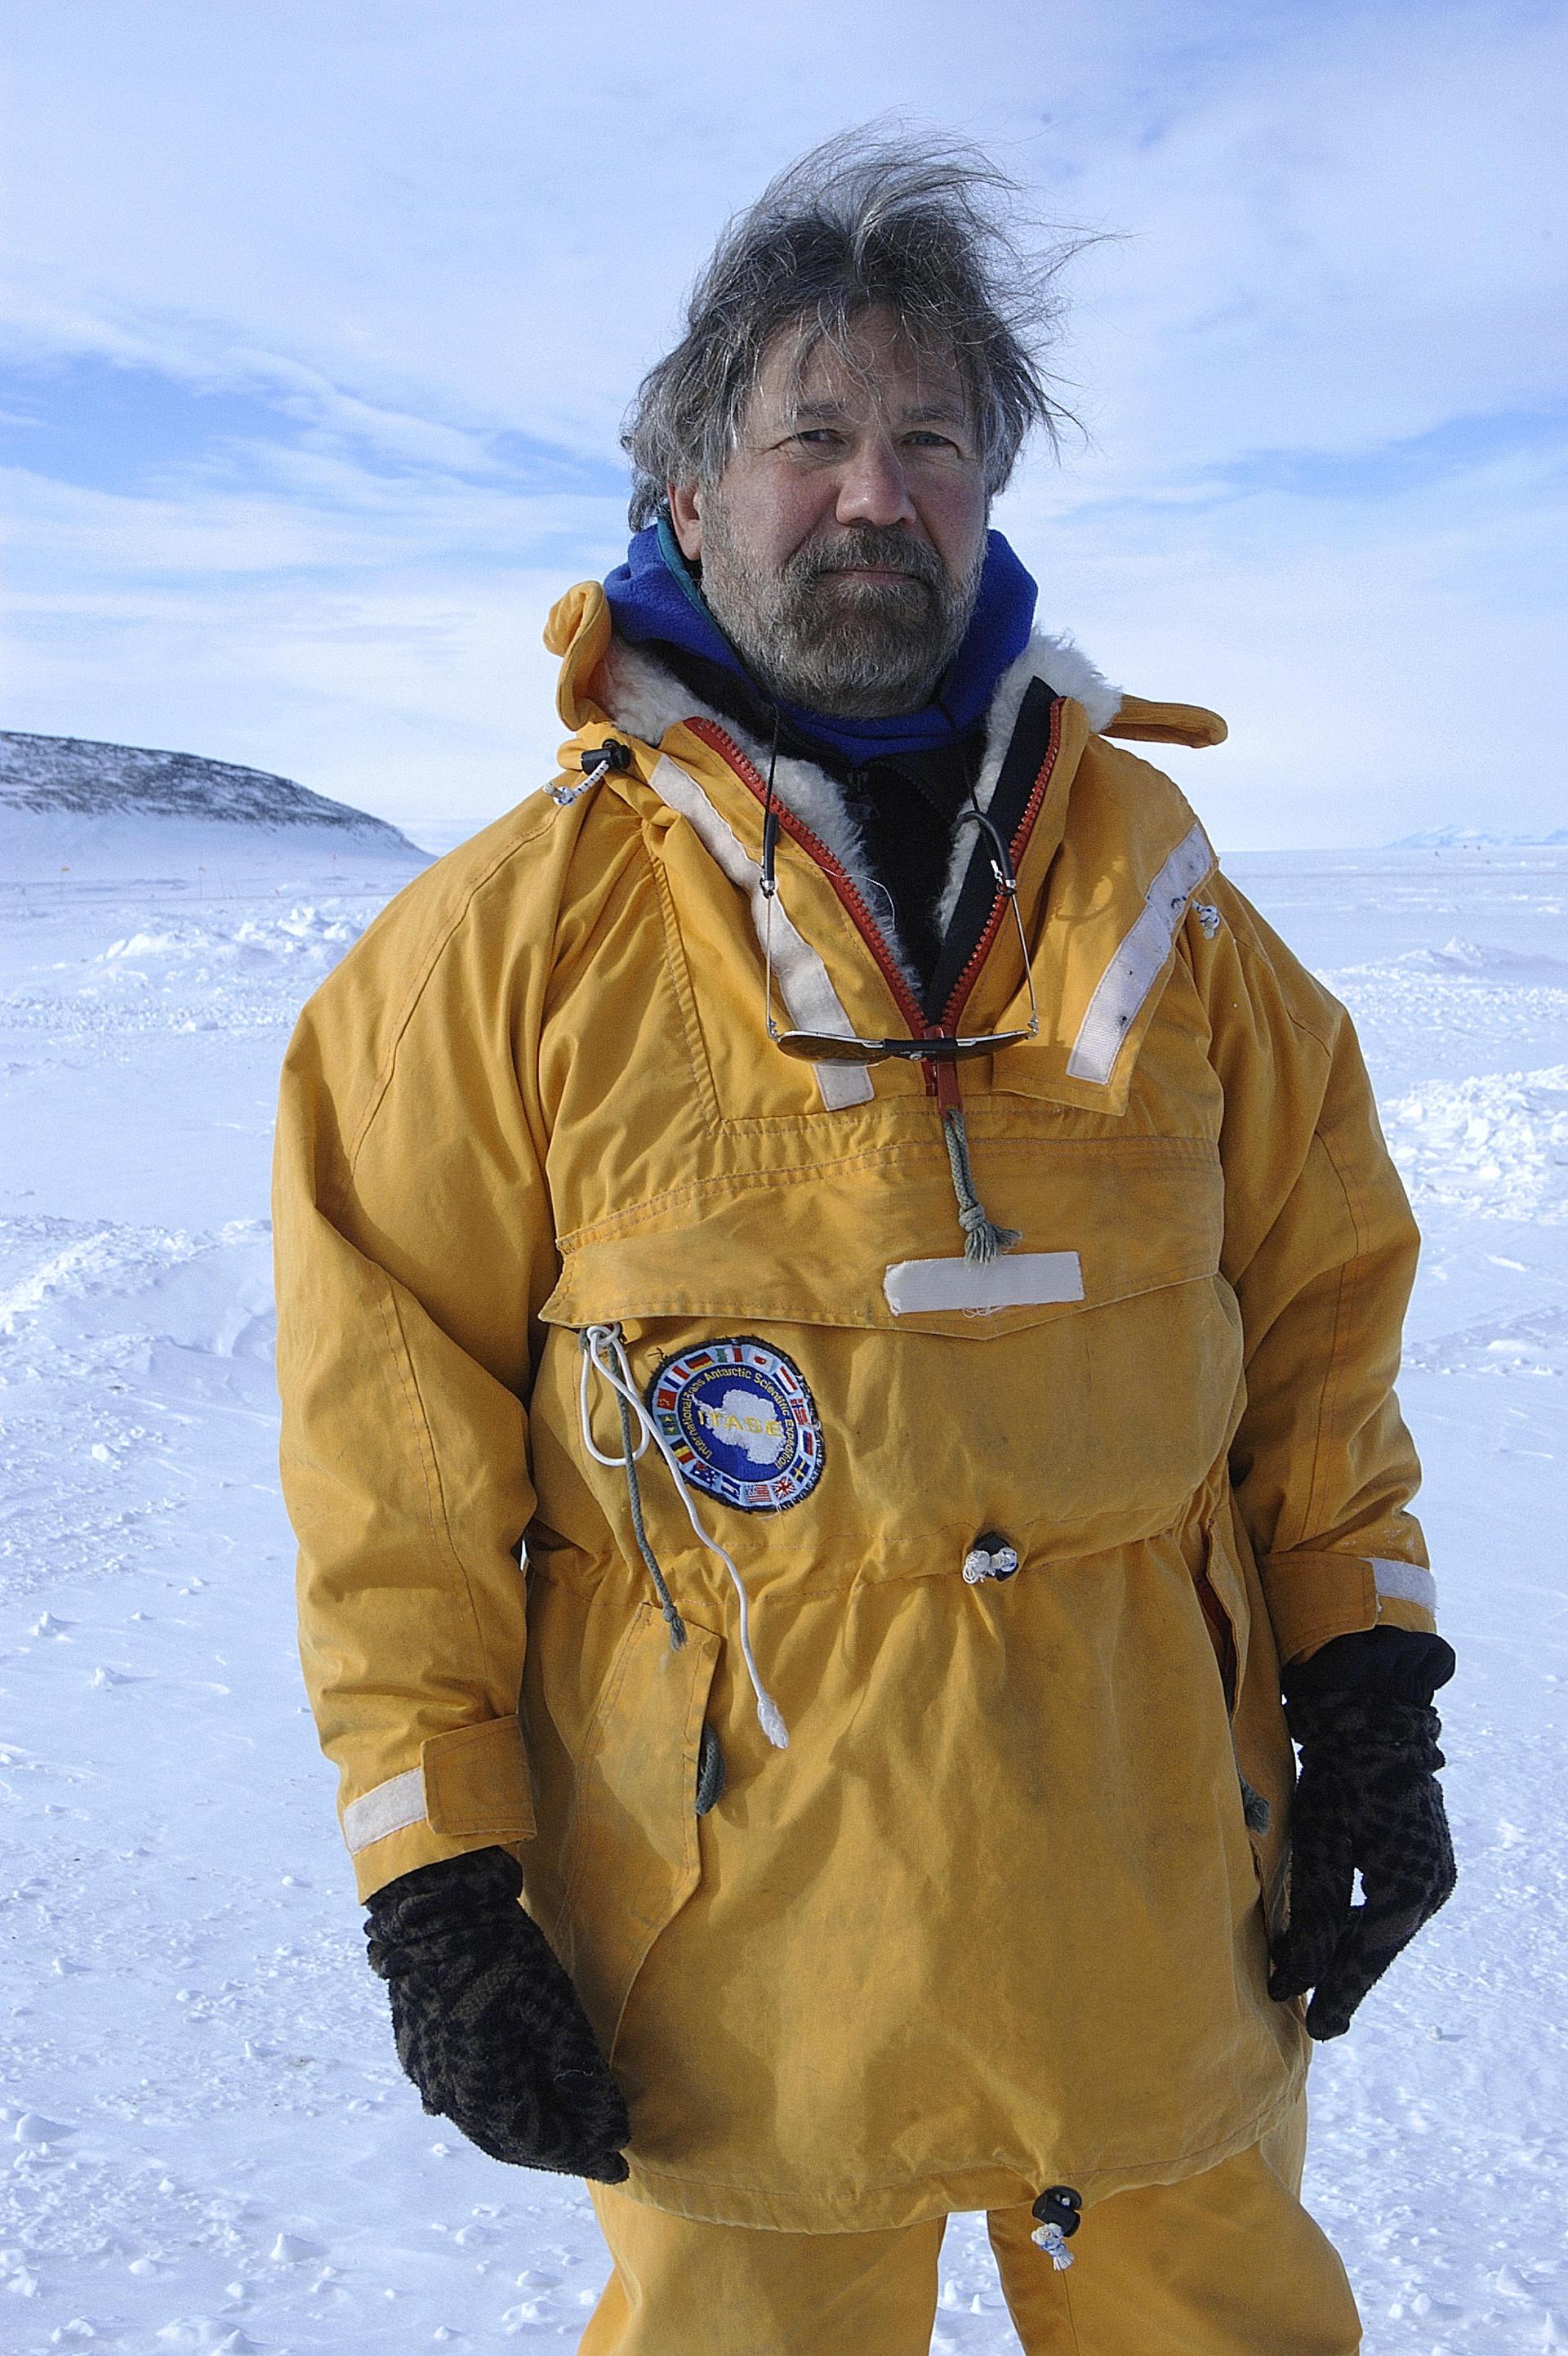 Paul Mayewski of the University of Maine has led more than 50 research expeditions in extreme environments.